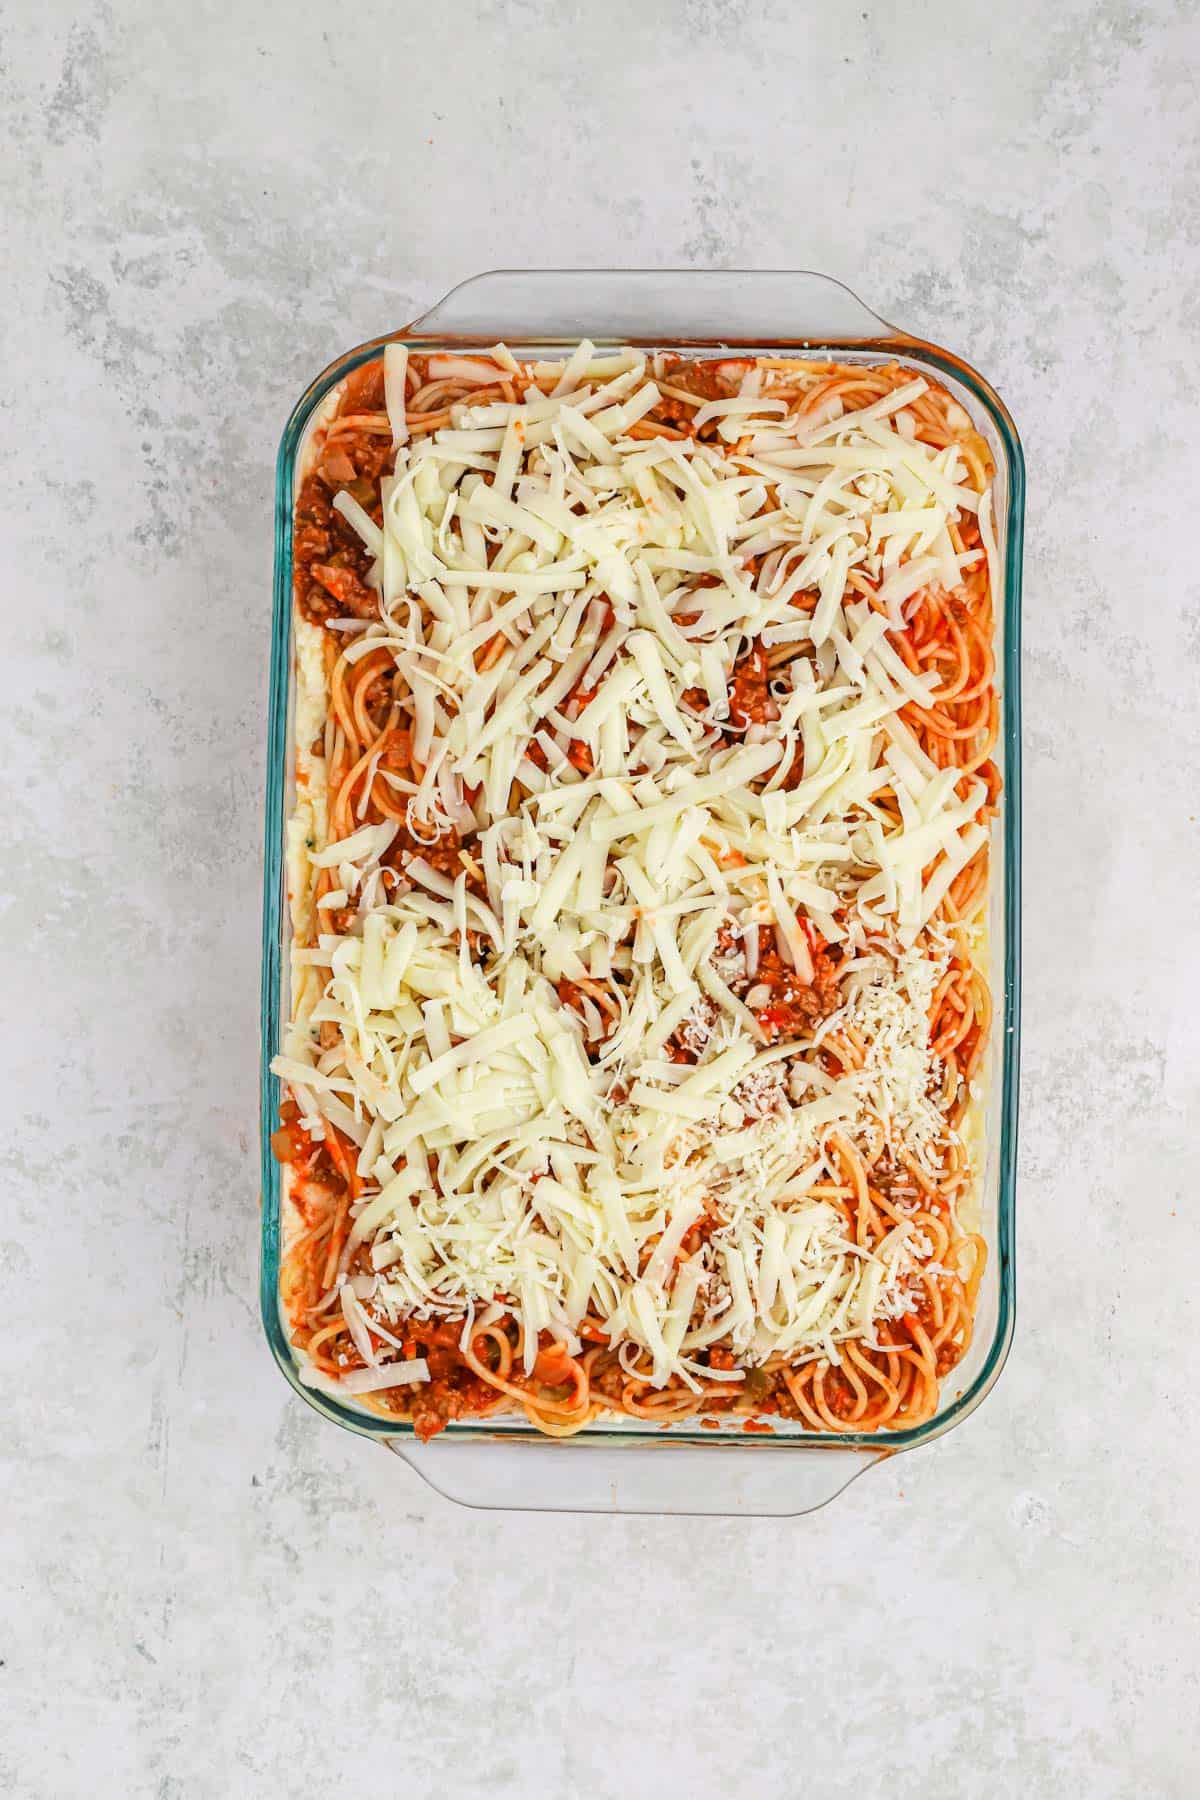 Baked spaghetti in a dish ready to cook.